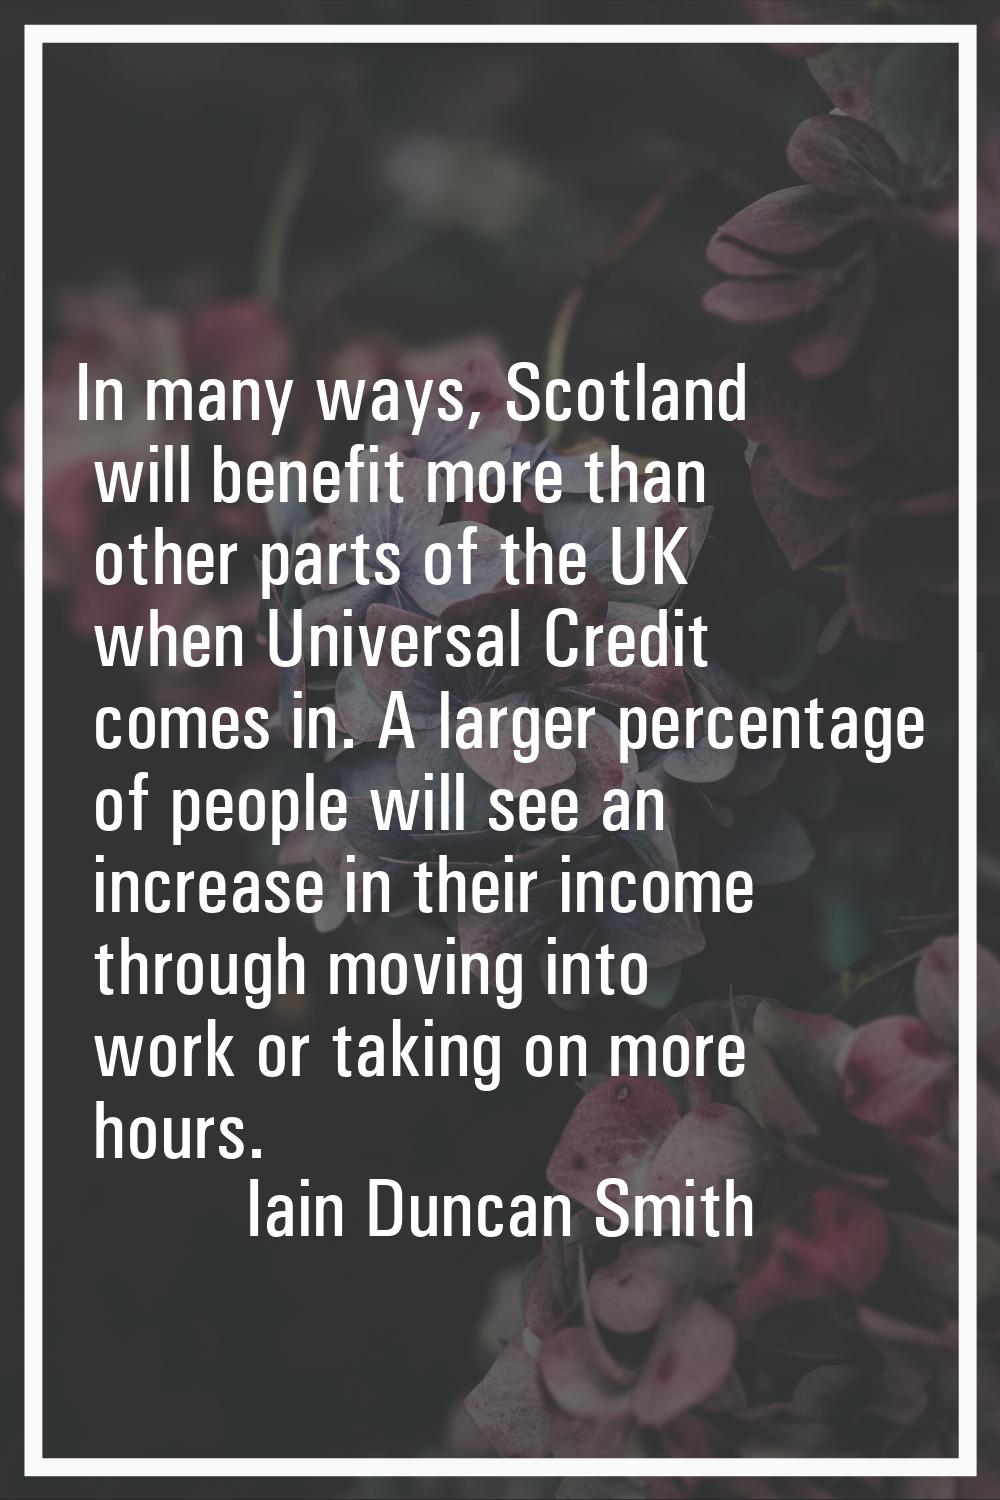 In many ways, Scotland will benefit more than other parts of the UK when Universal Credit comes in.